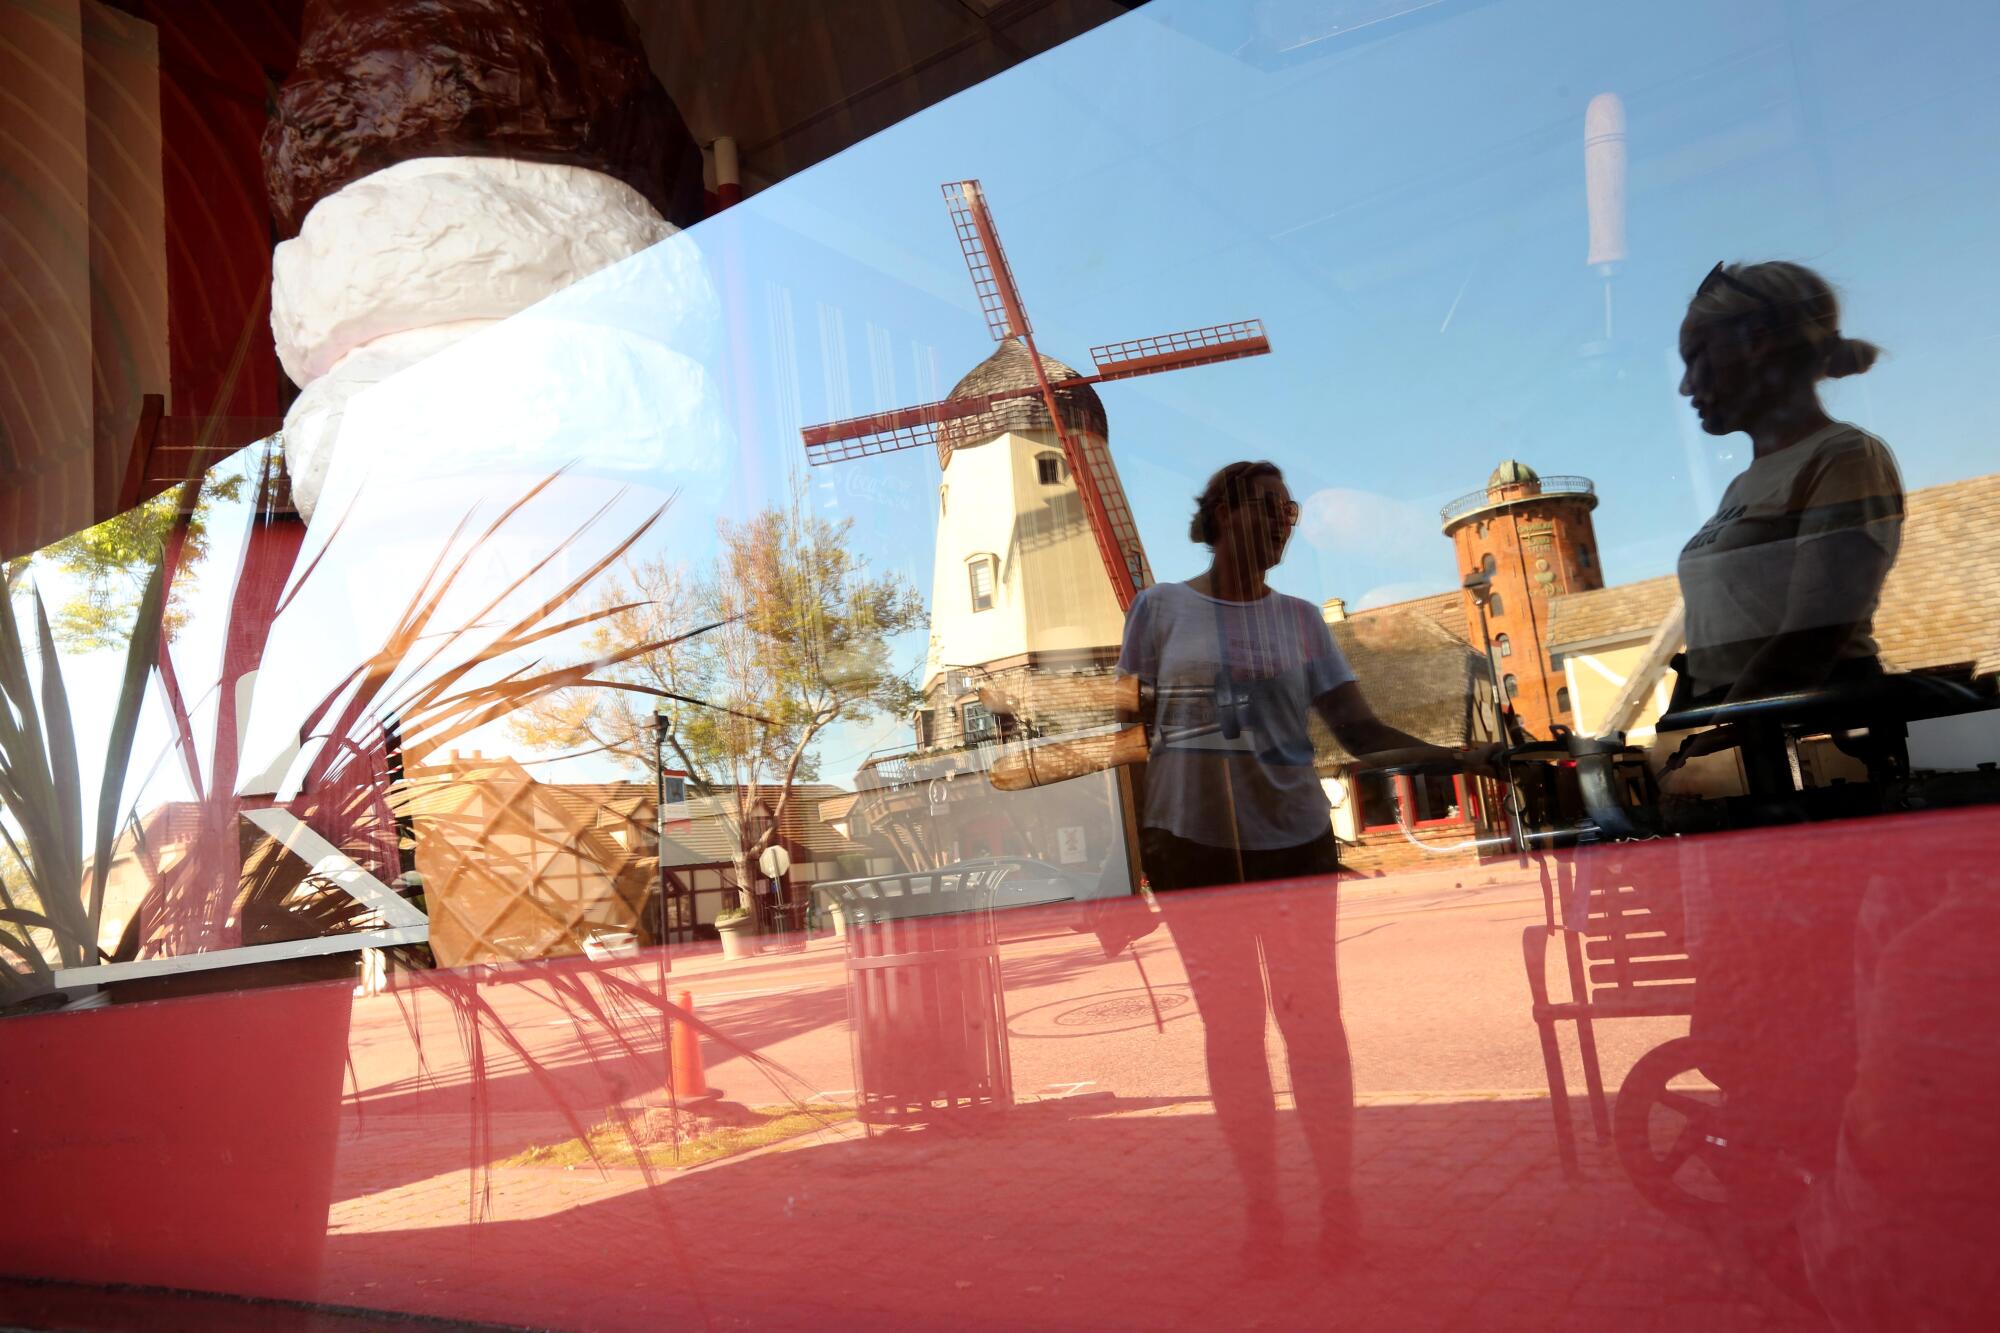 Alicja Clarke, right, and Jusyna Zimkowski talk while reflected in a storefront window along with a windmill on Alisal Road in Solvang, Calif., last week. Clarke has not been working since the Copenhagen House had to close due to the coronavirus pandemic.